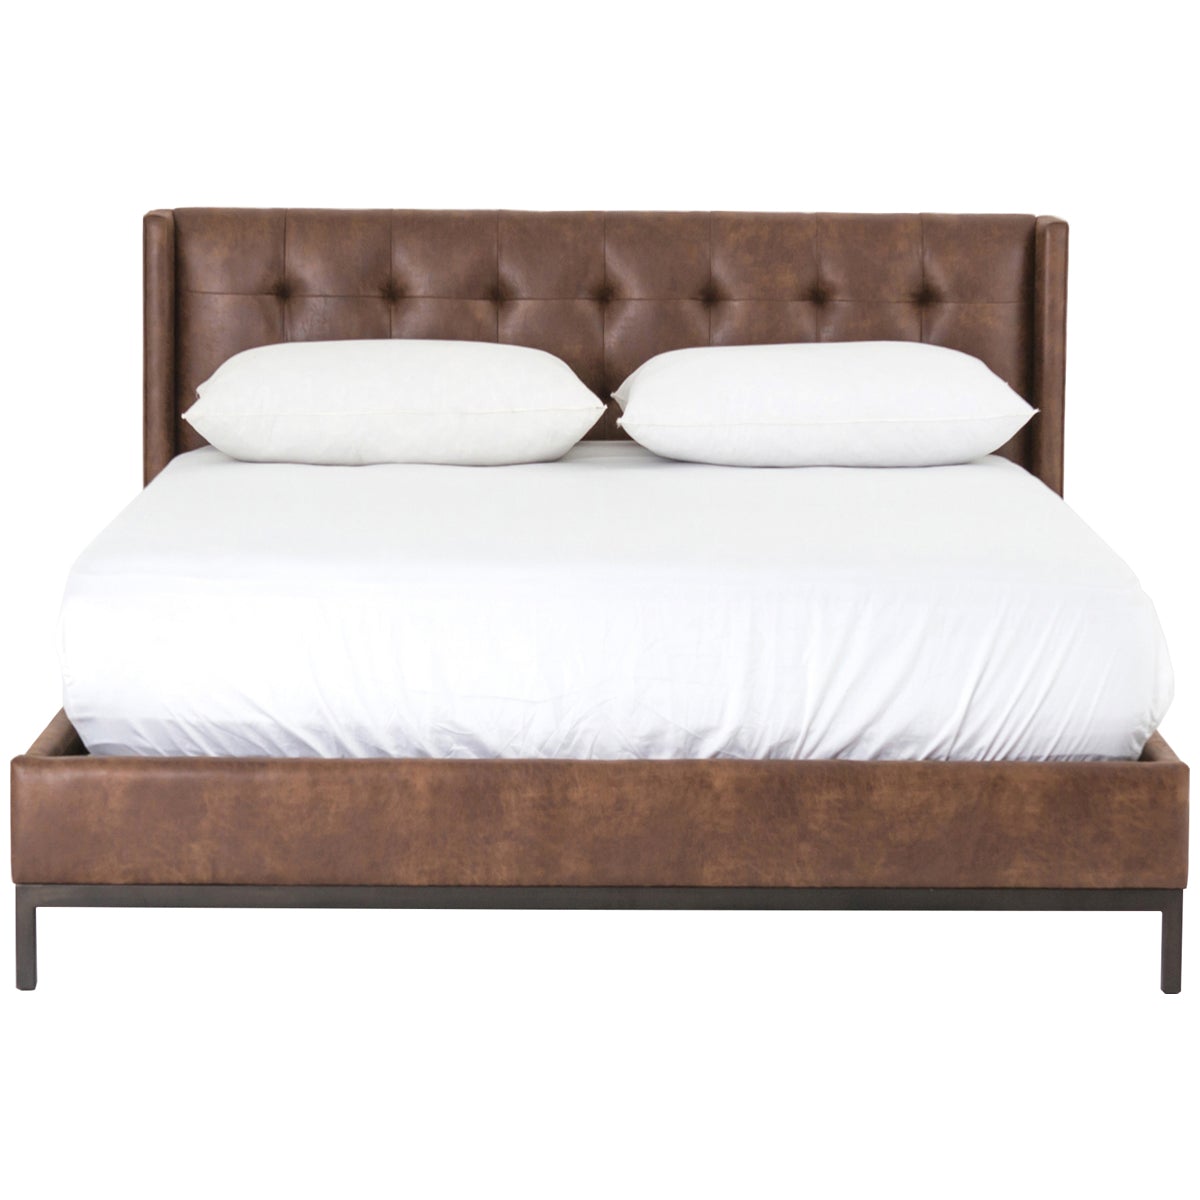 Four Hands Easton Newhall Bed - Vintage Tobacco